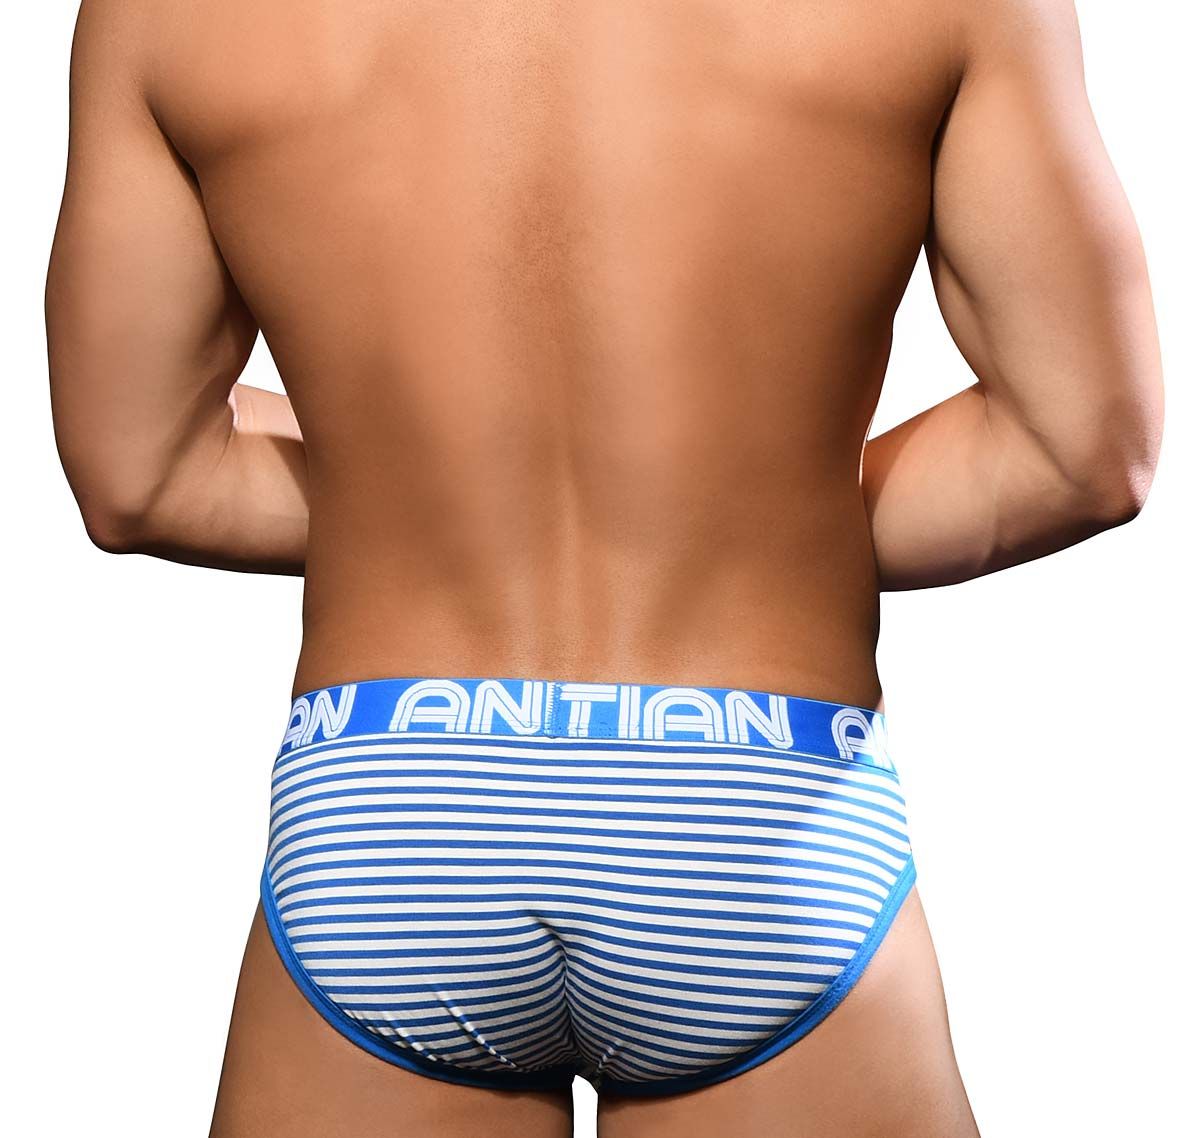 Andrew Christian Slip FLY BRIEF w/ ALMOST NAKED 92738, blauw/wit